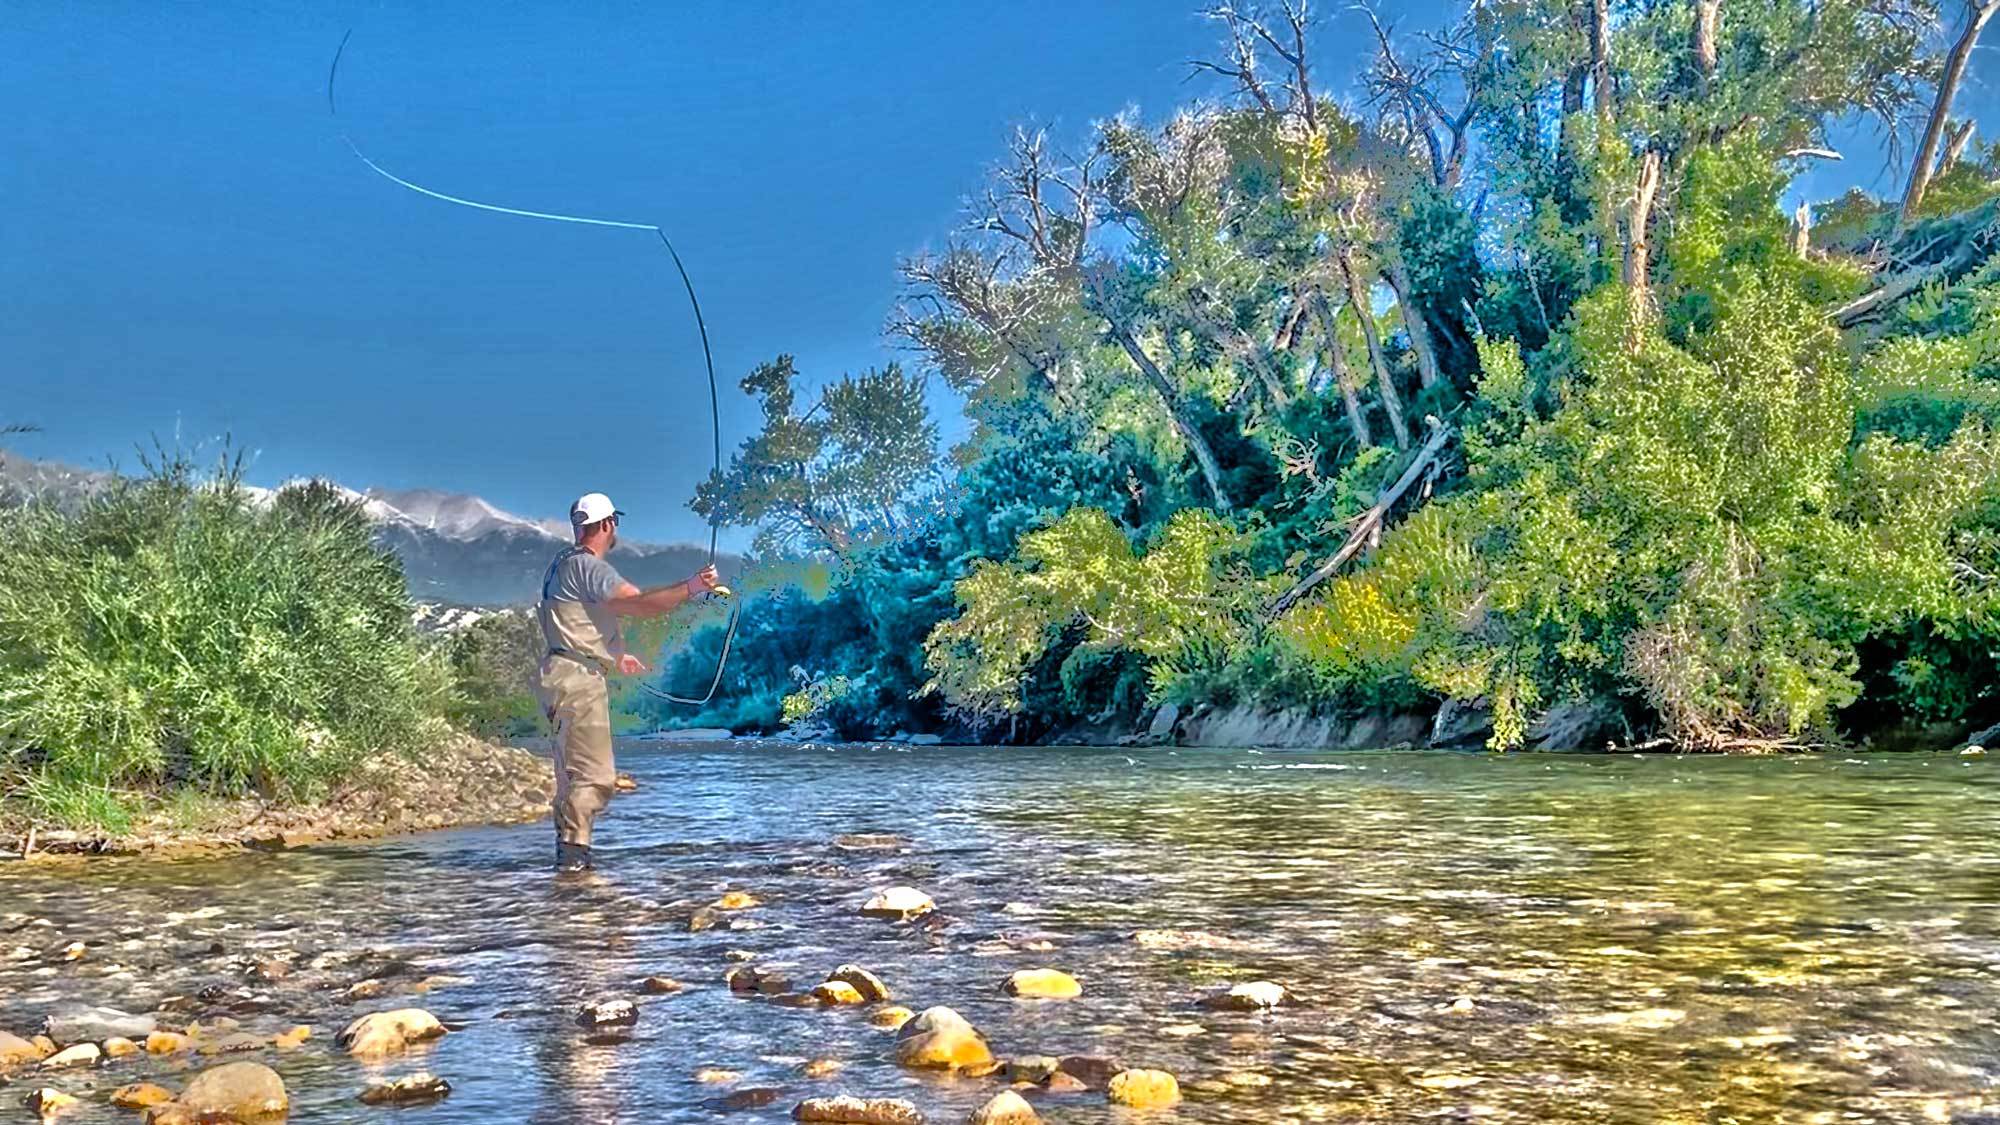 Keeping fly fishing equipment dry during river wading — Red's Fly Shop